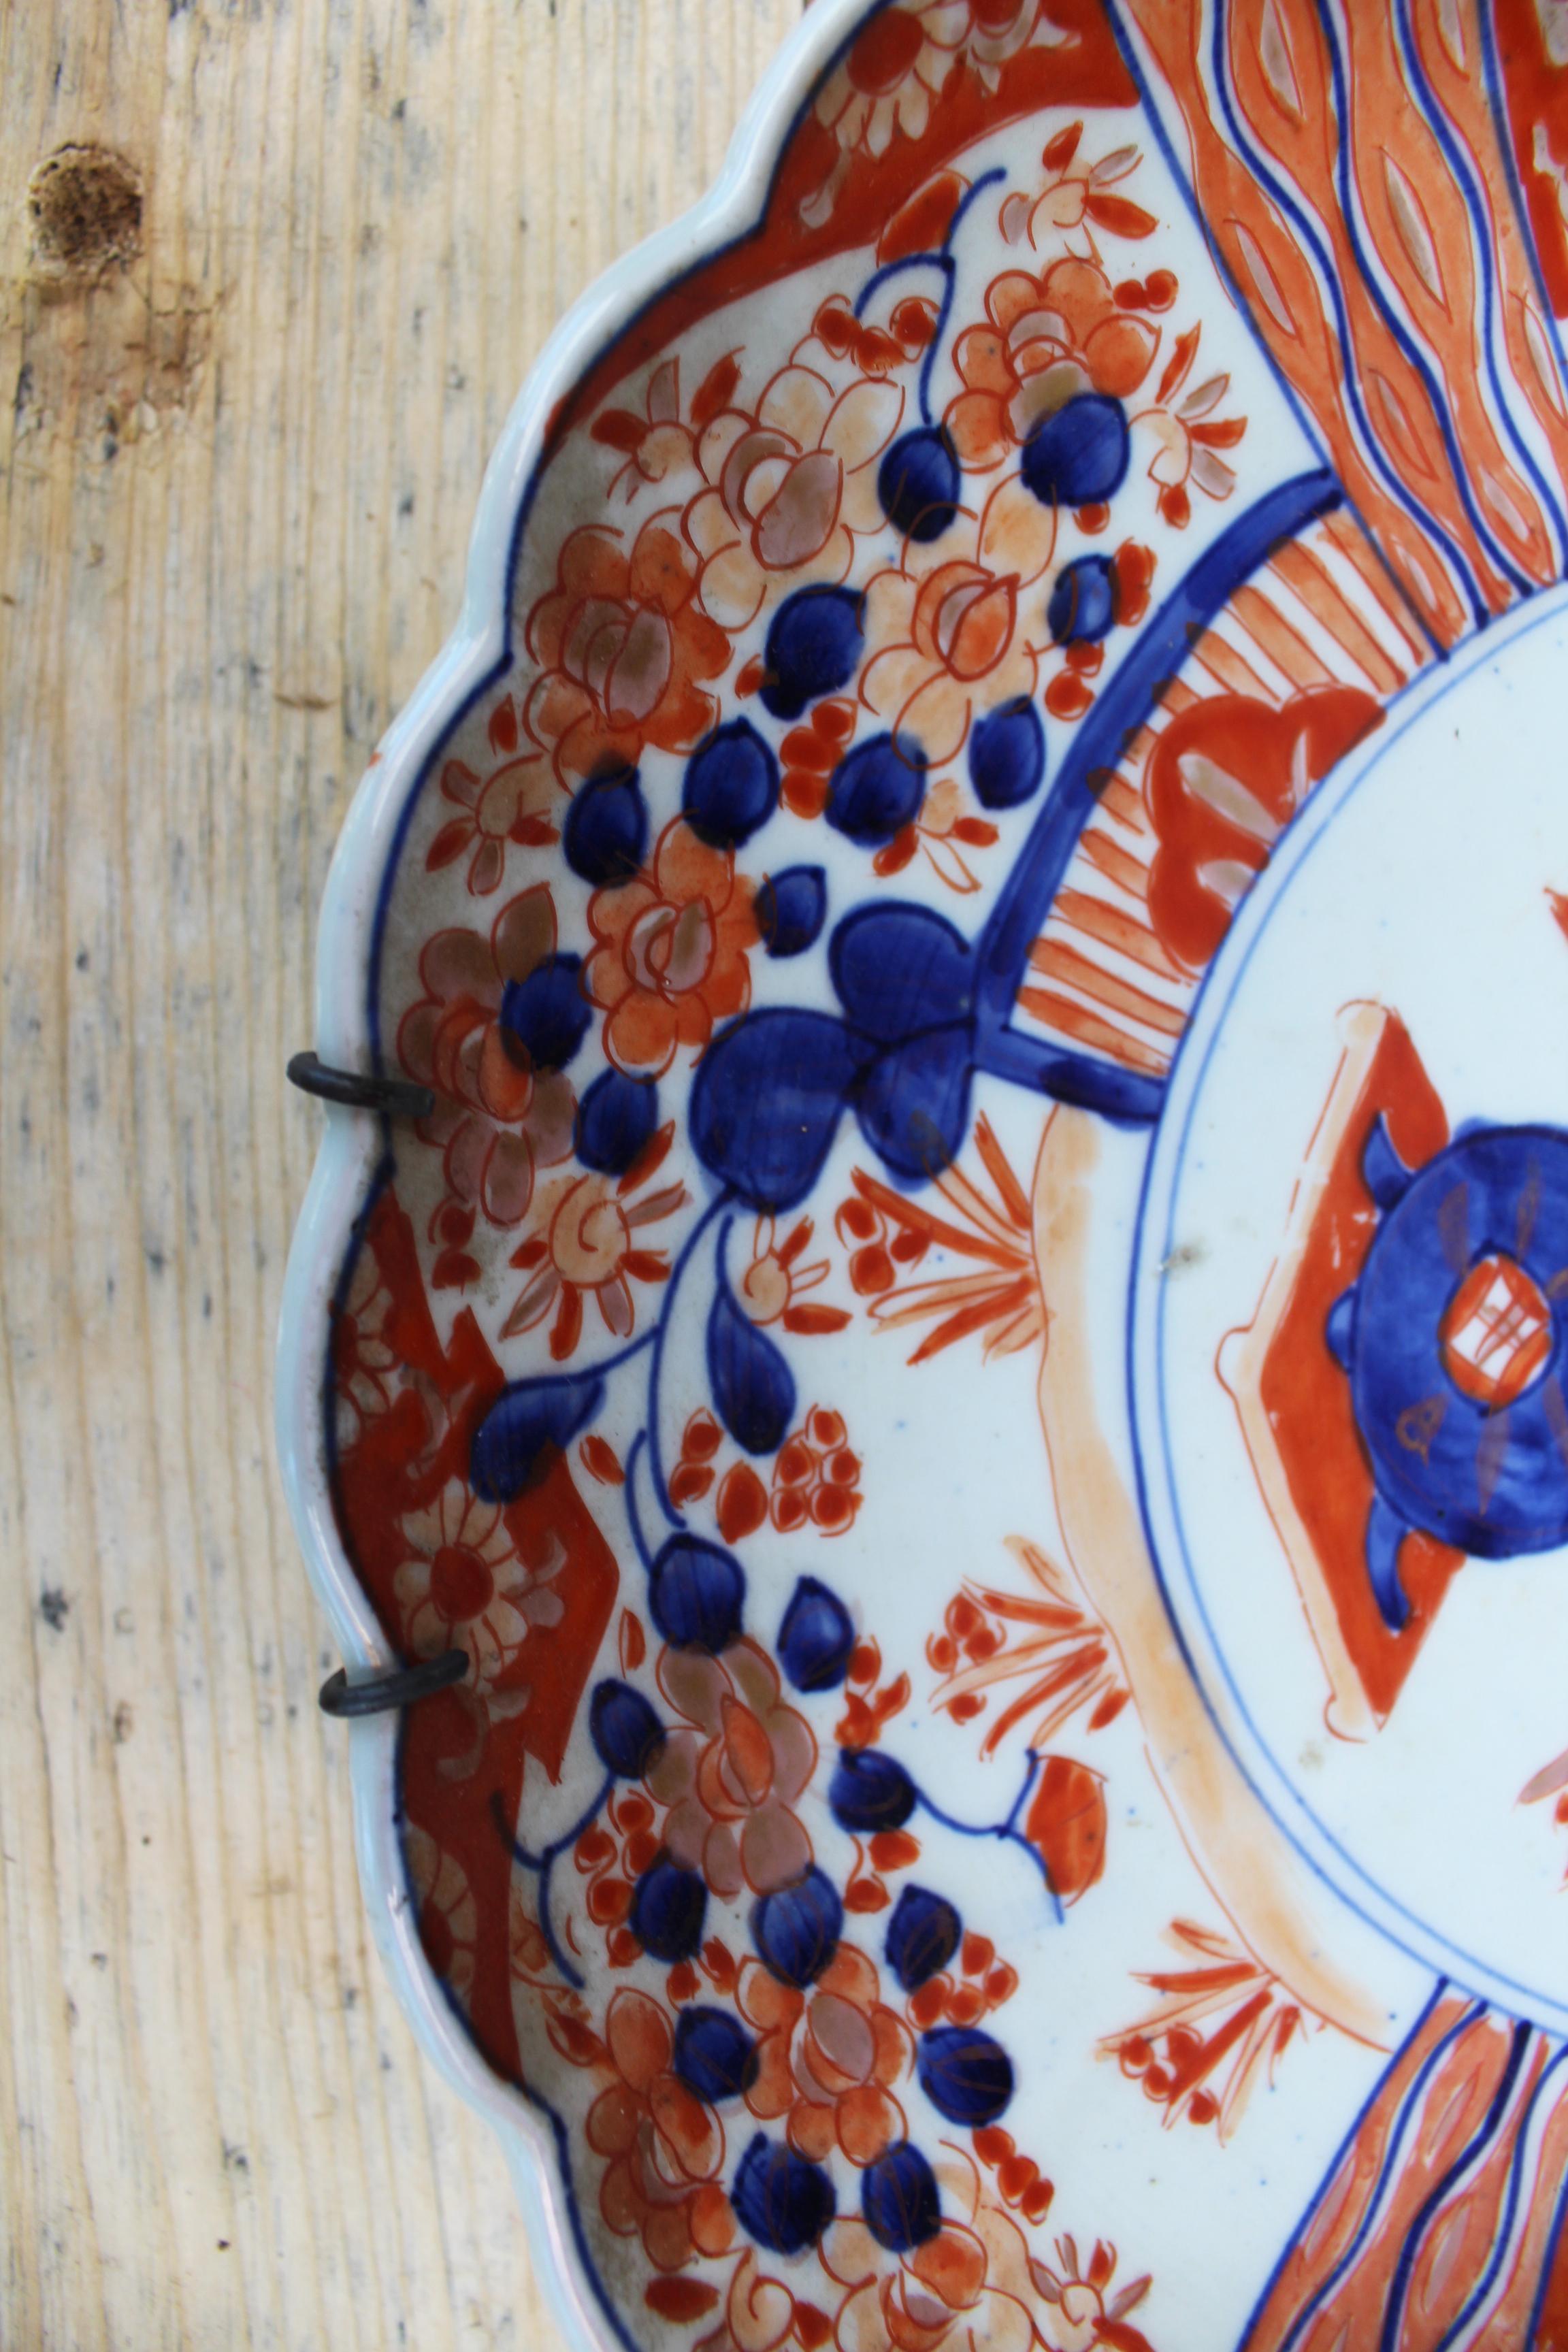 Hand-Painted 19th Century Japanese Imari Ware Porcelain Hand Painted Plate with Flower Motifs